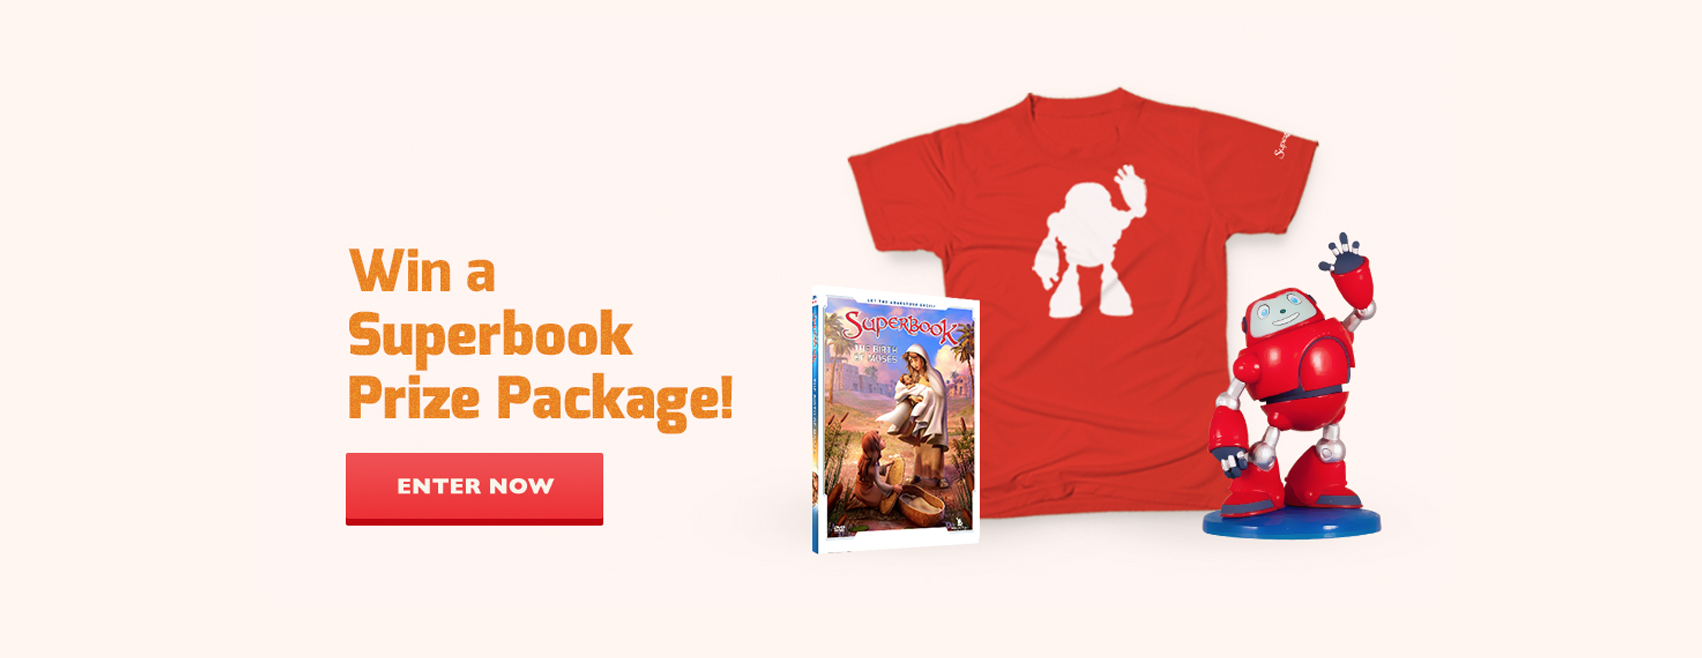 Win a Superbook DVD, Figurine, and T-Shirt!